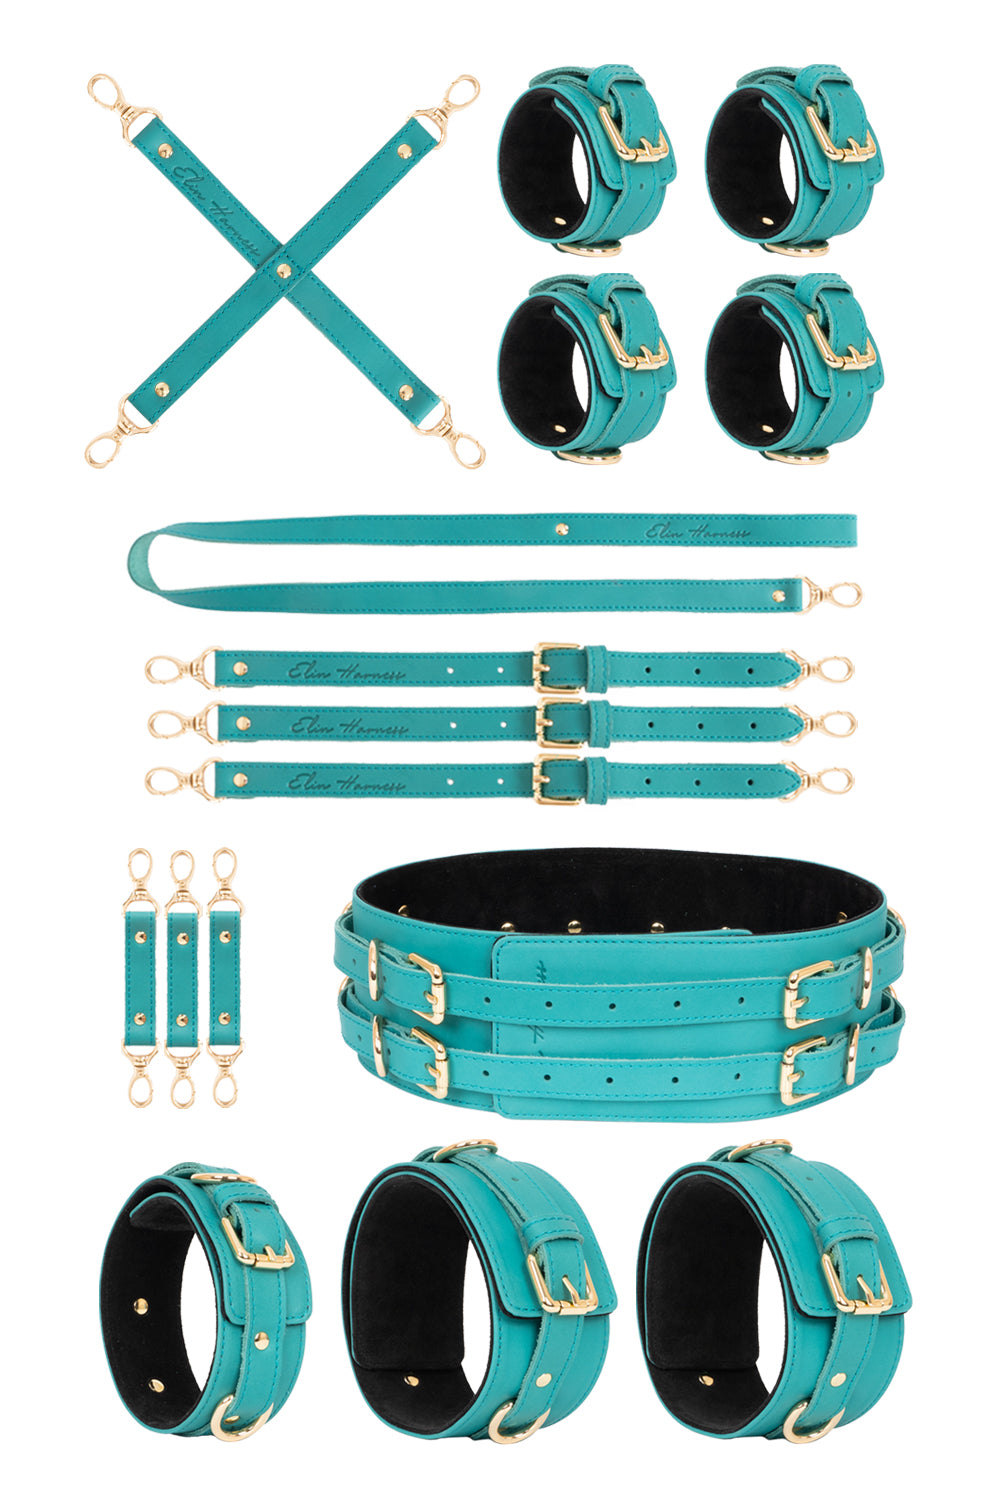 CRAZY HORSE Full Leather Set. 10 colors